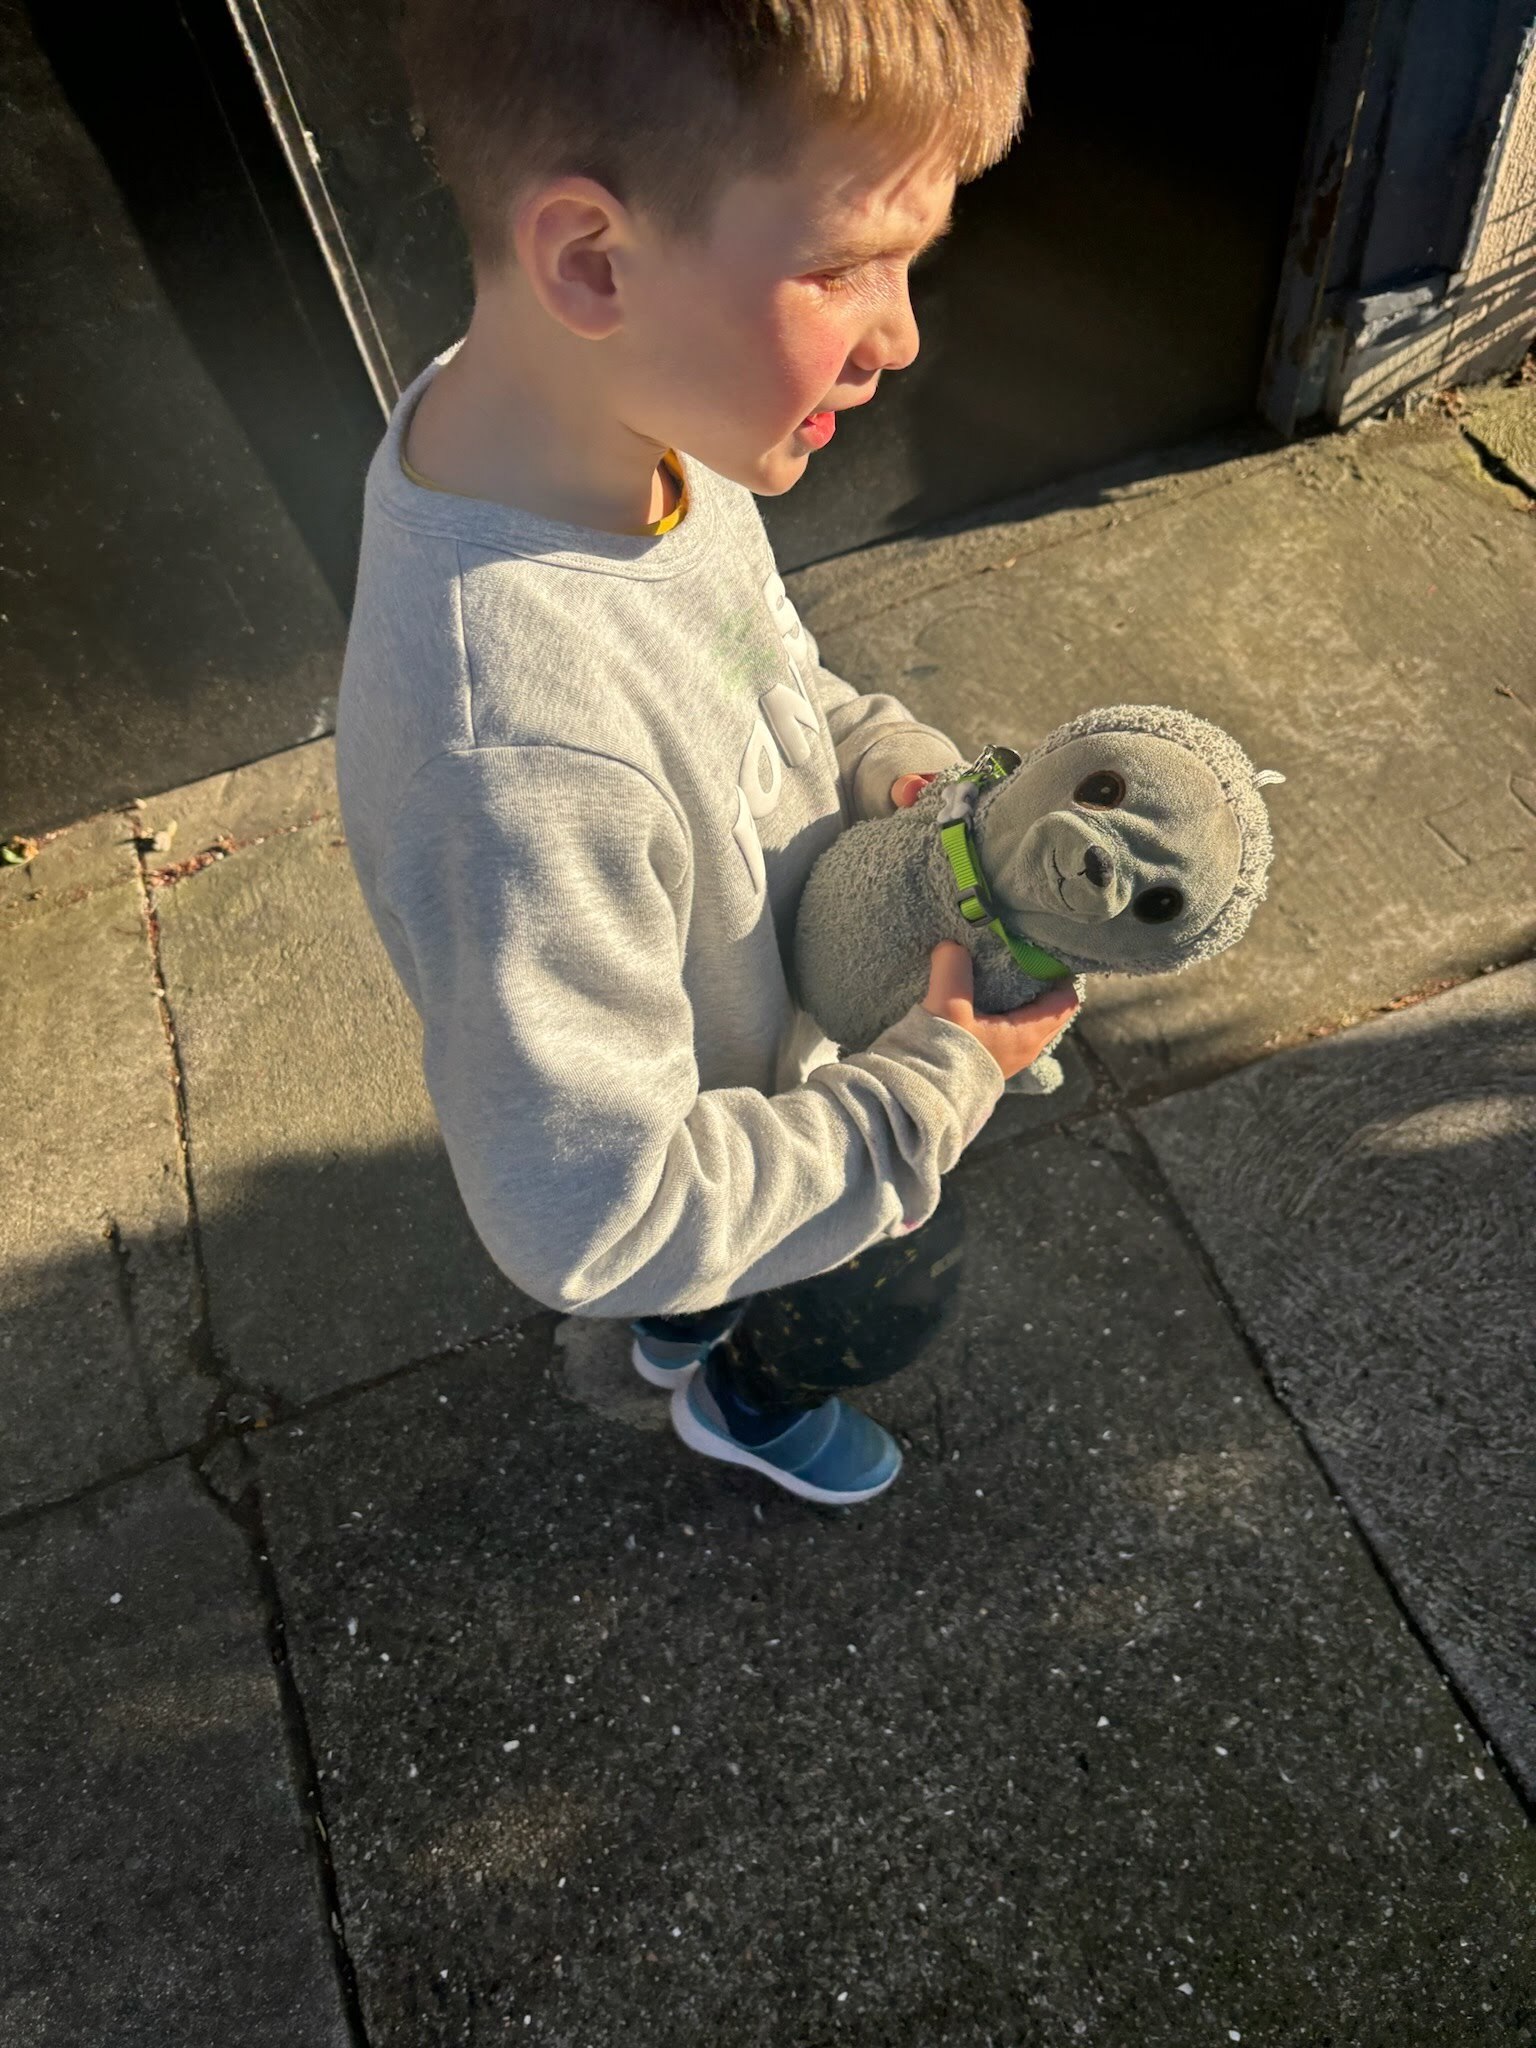 A young boy stands outside holding a plush grey sloth toy, with sunlight casting shadows on the pavement.